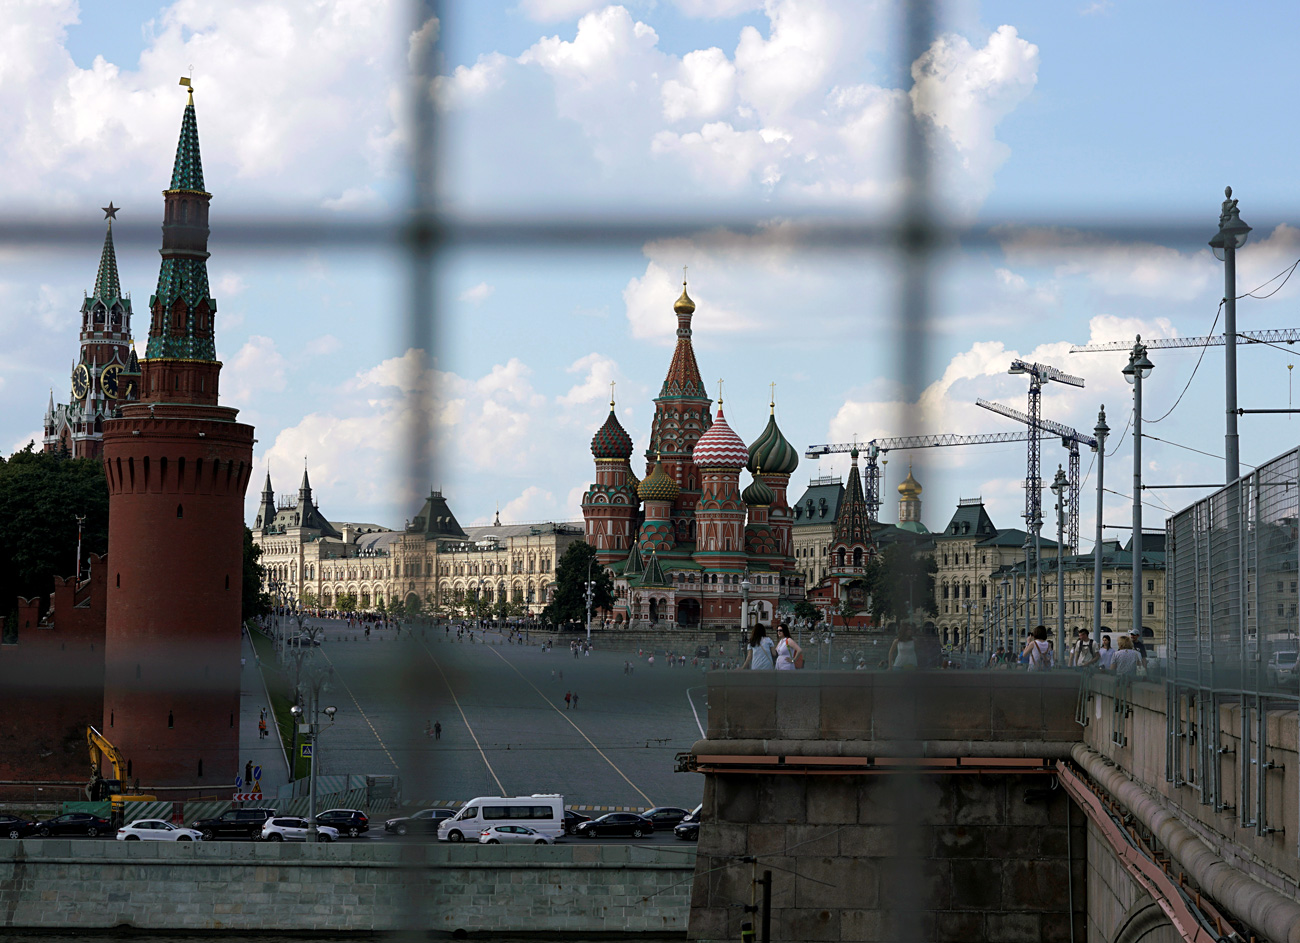 A view through a construction fence shows the Kremlin towers and St. Basil's Cathedral on a hot summer day in central Moscow, Russia, July 1, 2016.